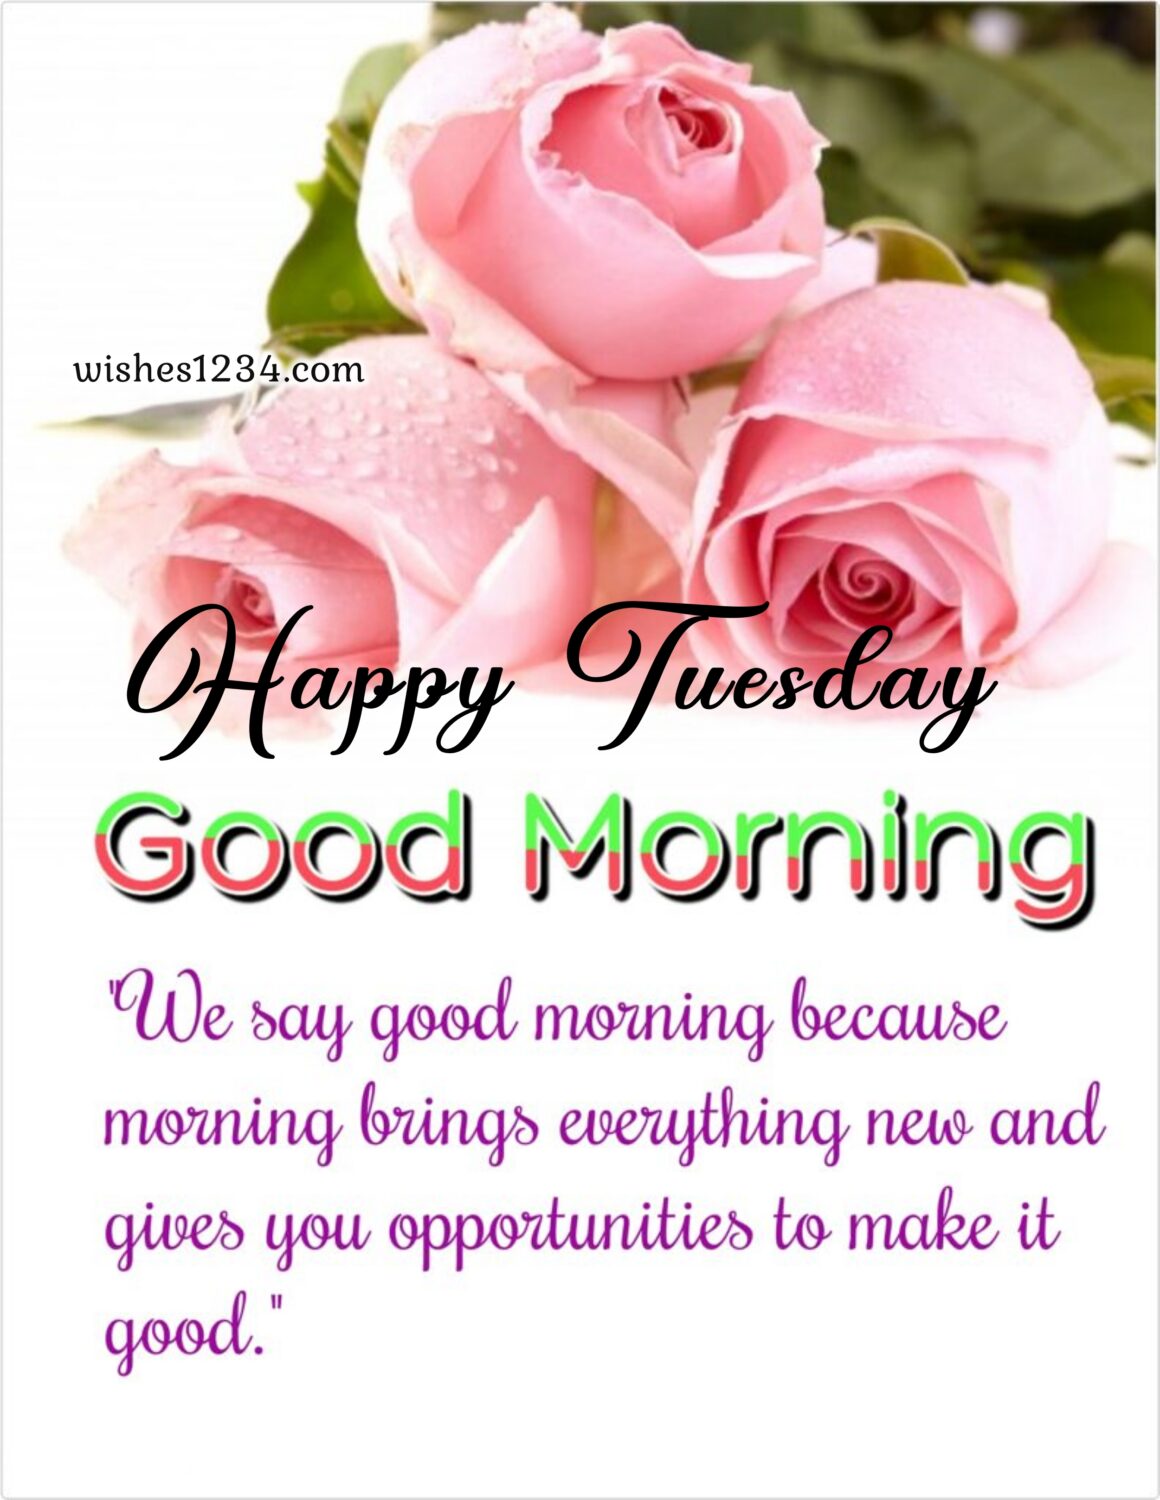 Tuesday wishes with Three rose flowers bunch, Inspirational Tuesday Blessings.